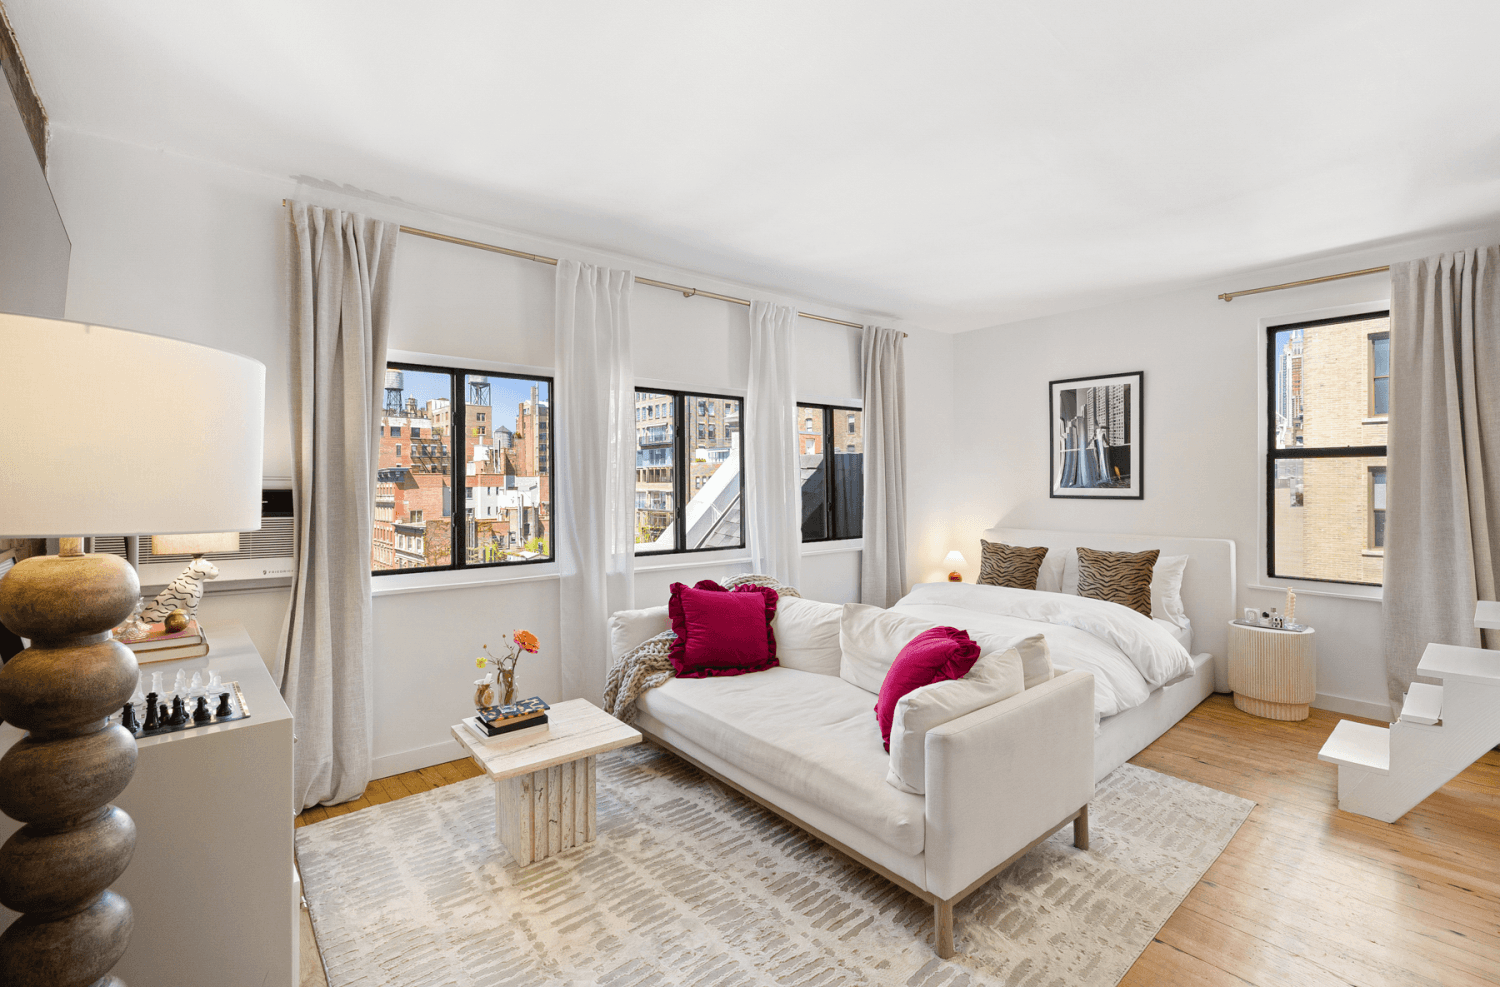 An enchantingtop floorco op with a private rooftop terrace and exposed redbrick walls, this chic 1 bathroom studio loft offers a quintessential Greenwich Village lifestyle close toUnion Square, Washington Square ...